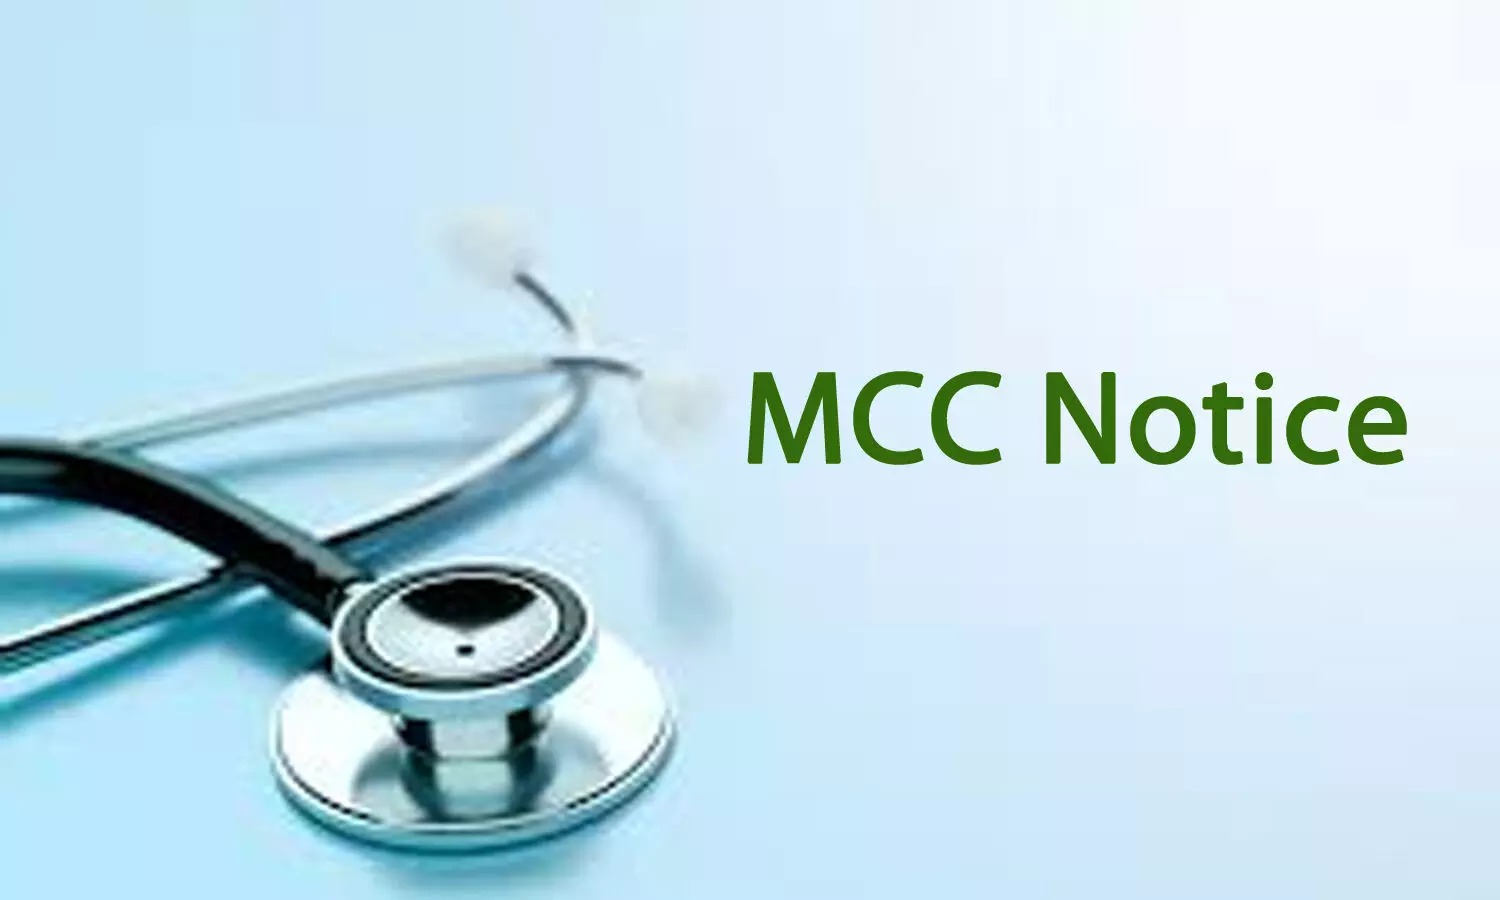 NEET PG 2021 Counselling: MCC Specifies Documentation For NRI Candidates